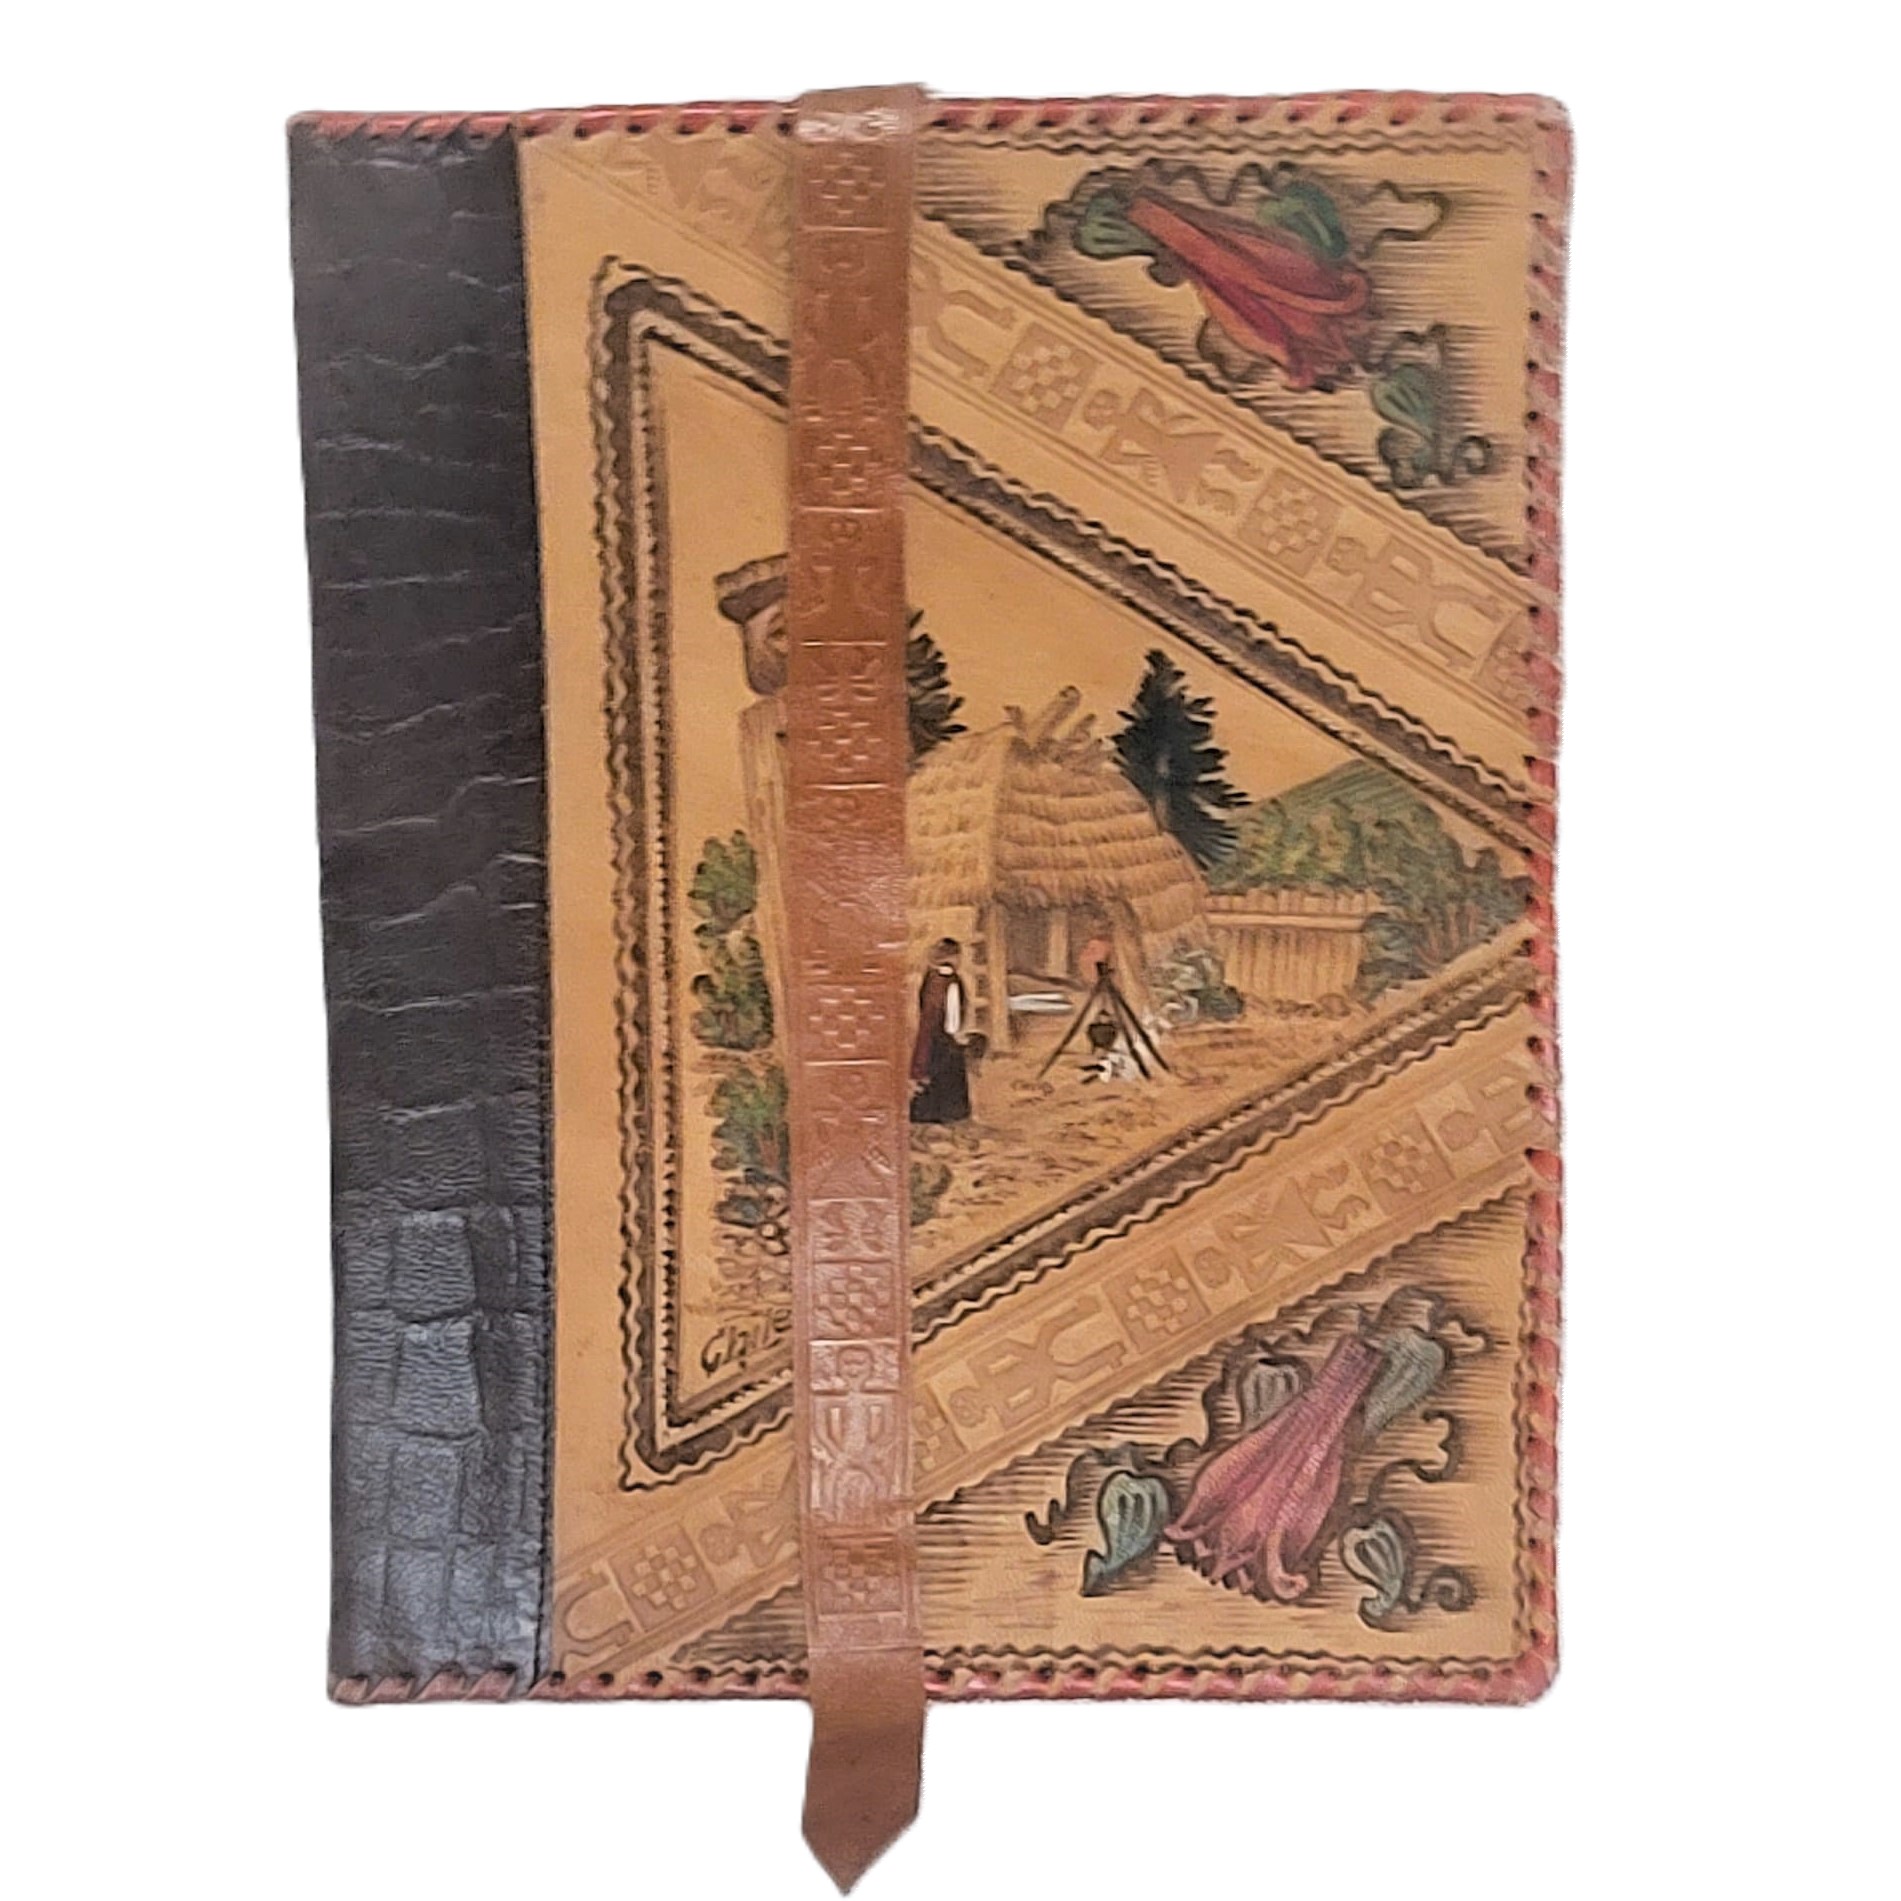 Tooled & Handpainted Leather Book Cover Jacket Signed Chili